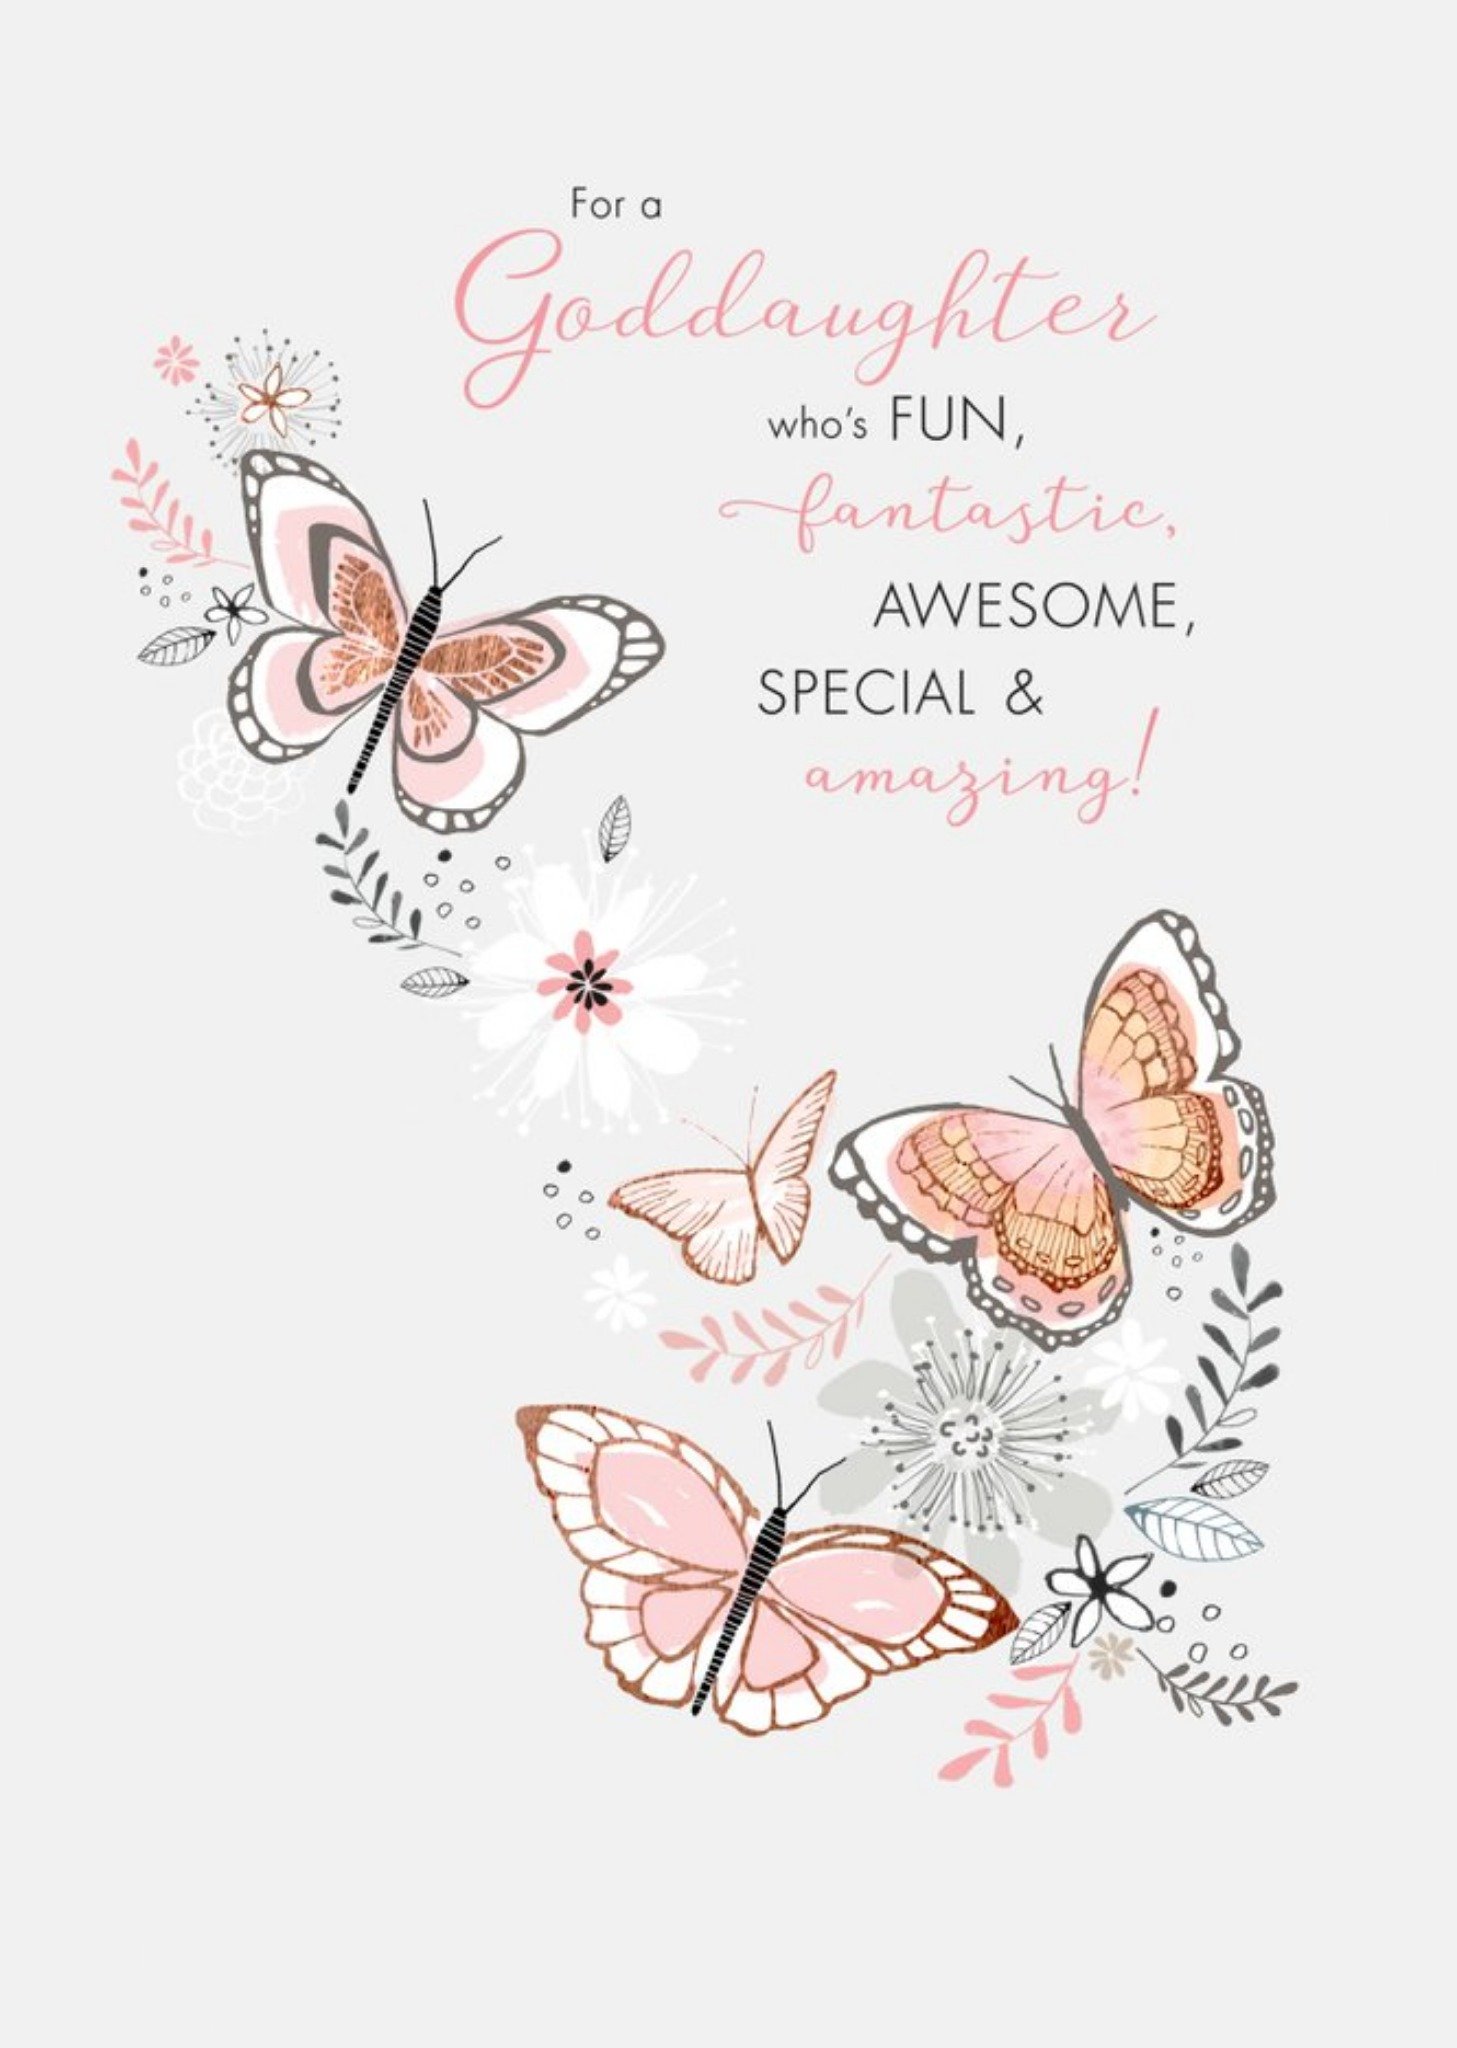 Moonpig Illustration Of Butterflies And Flowers Goddaughter's Birthday Card Ecard